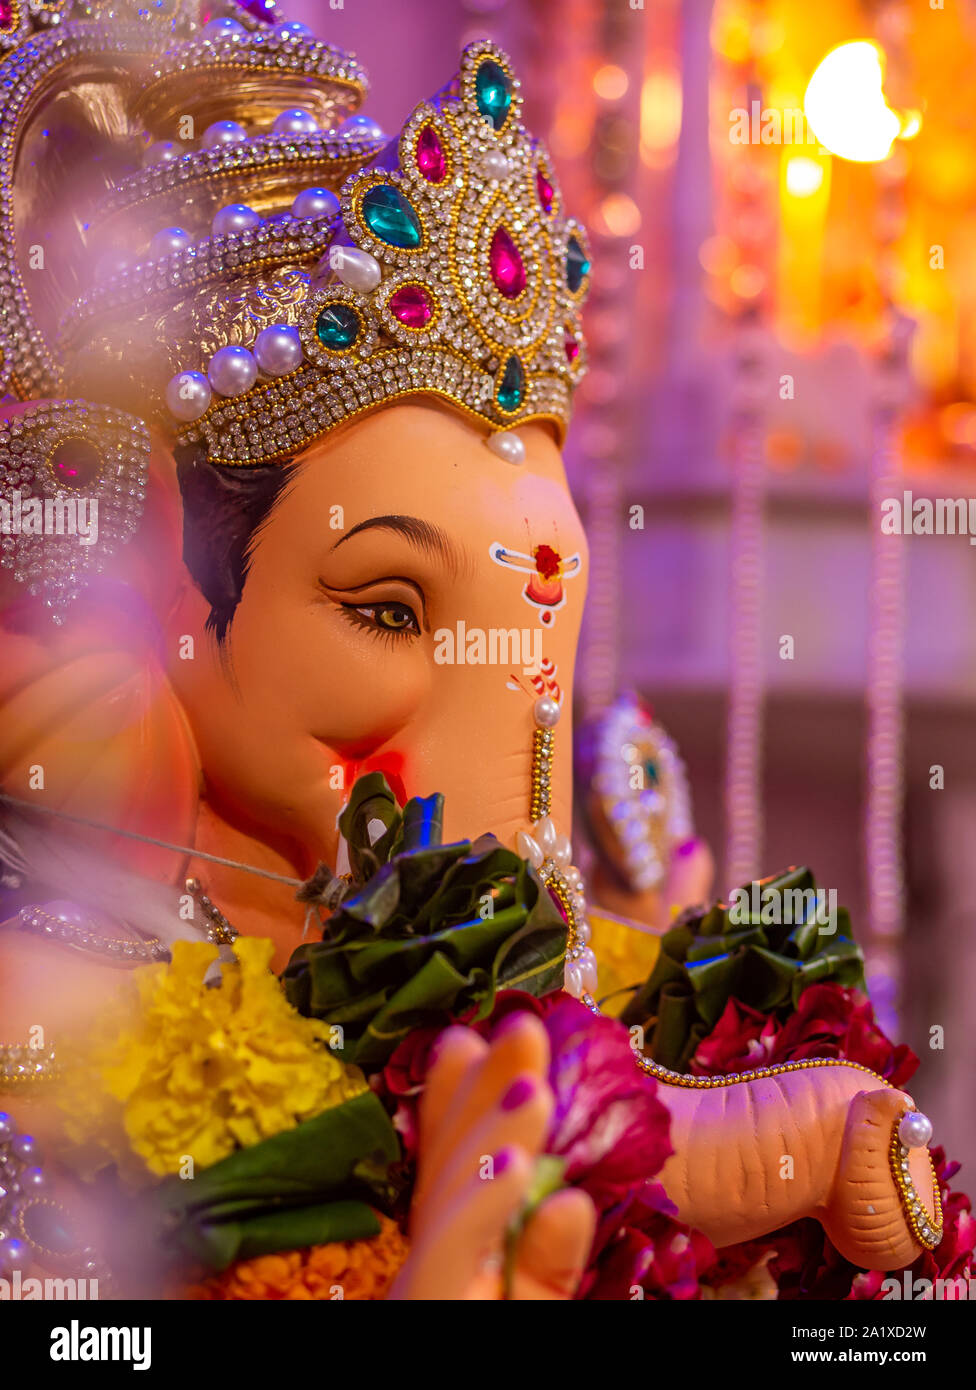 Extensive Collection of Stunning 4K Ganesha Images - Over 999 ...